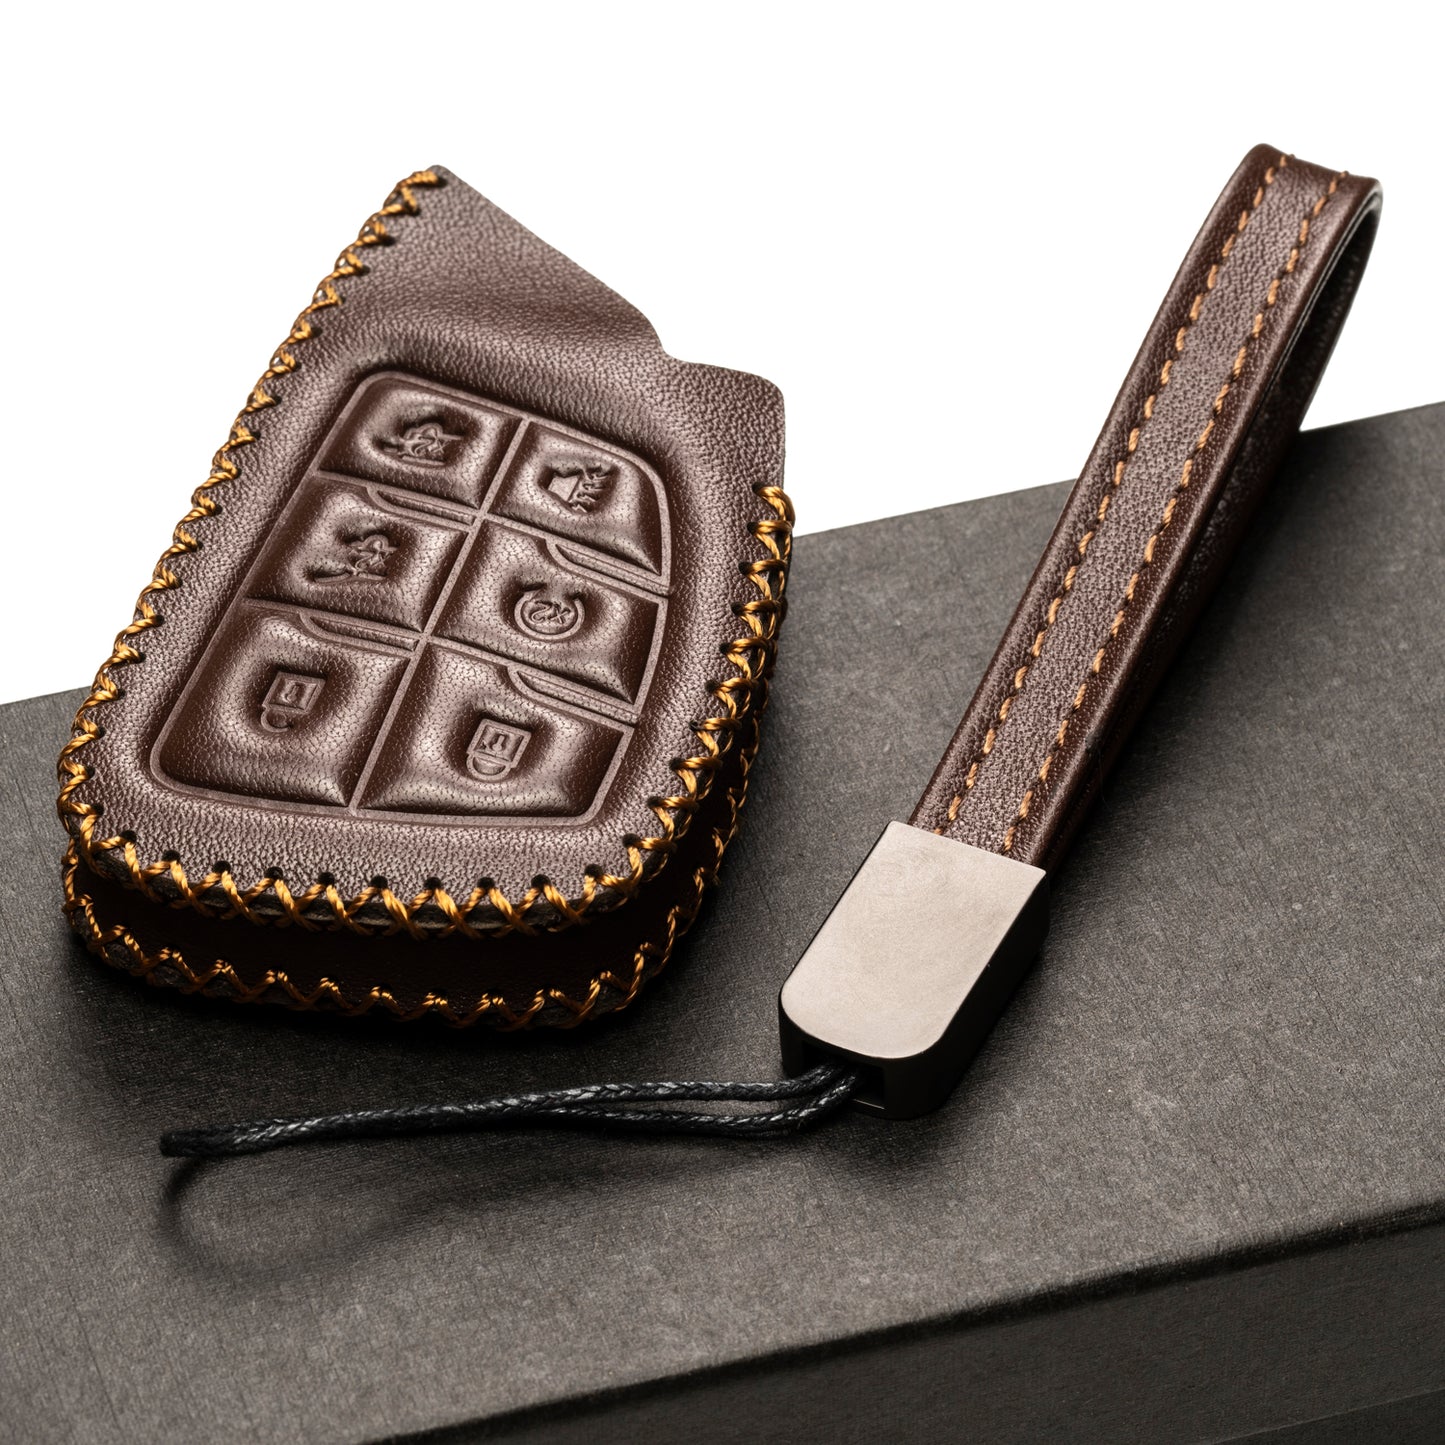 Vitodeco 6-Button Genuine Leather Smart Key Fob Case with Leather Key Strap Compatible with Chevrolet Suburban 2023, Chevrolet Tahoe 2023, Chevrolet Silverado 2023